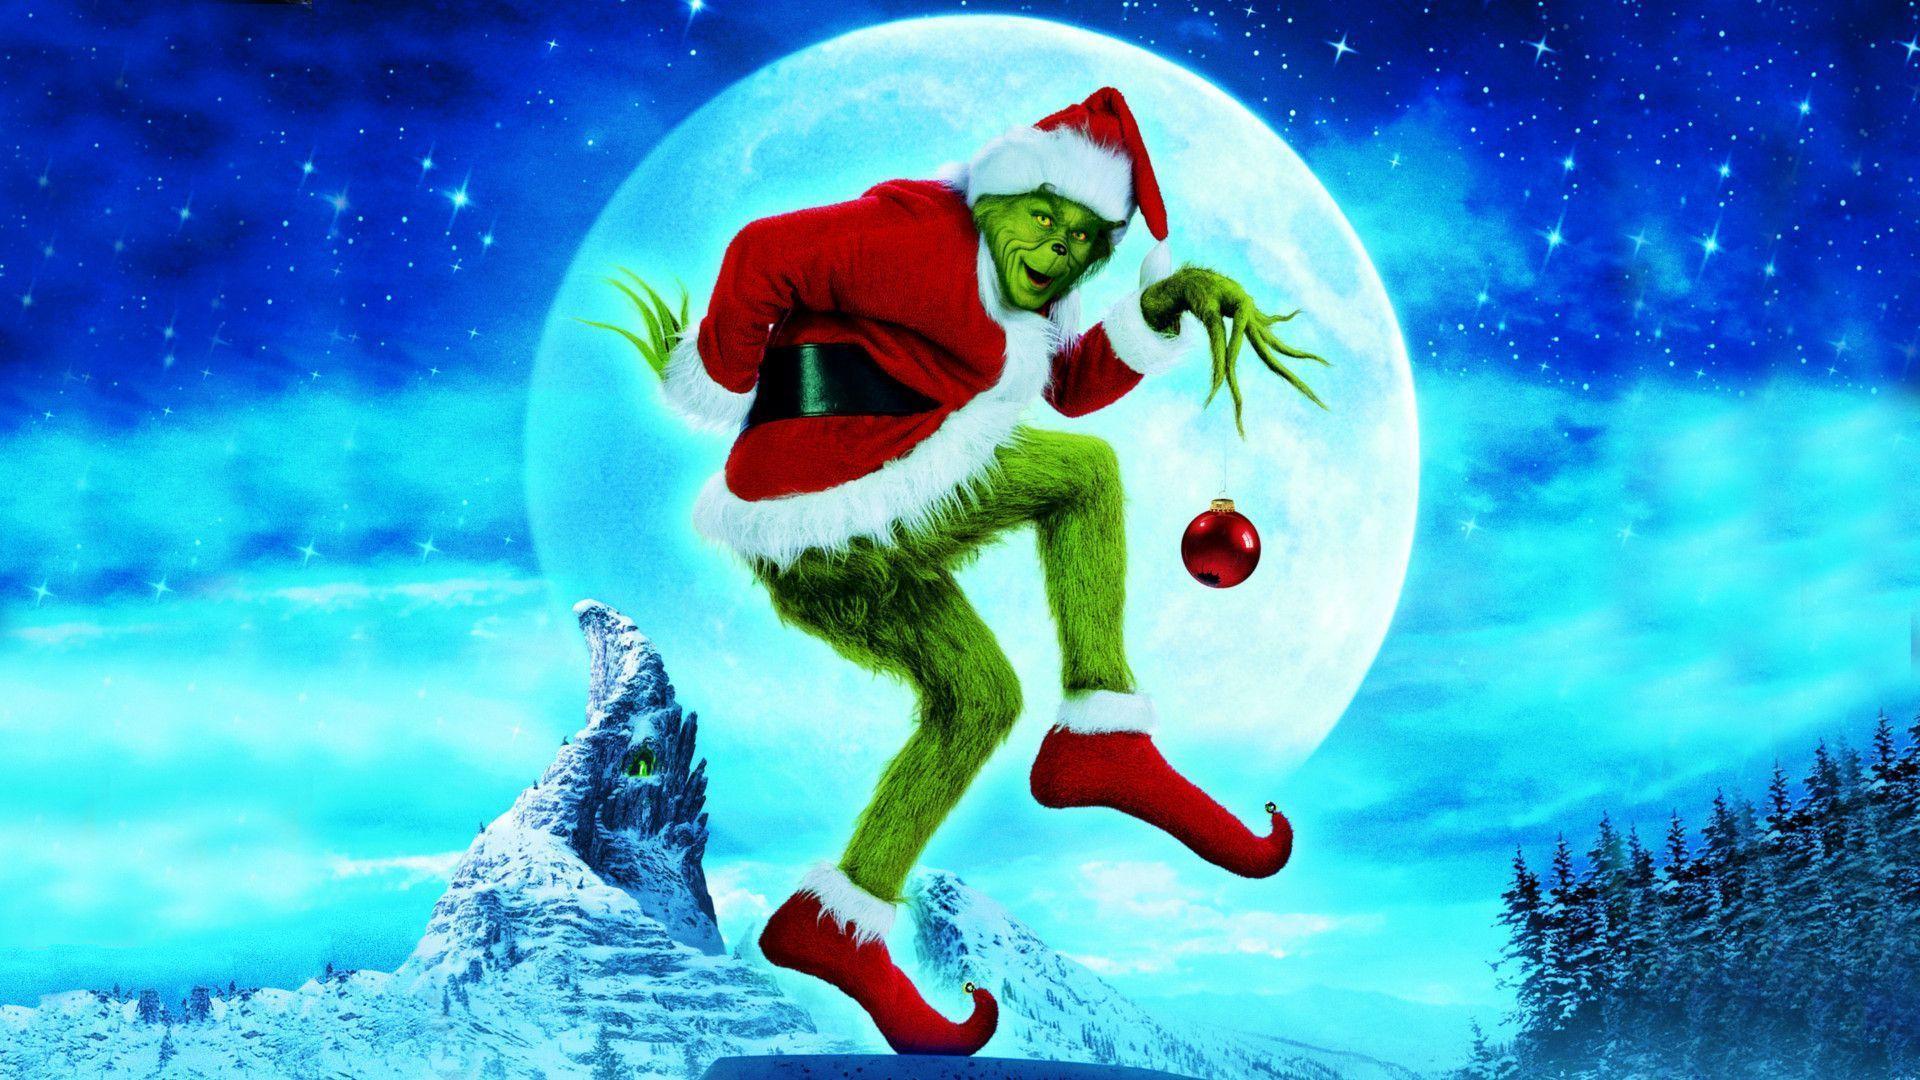 Wallpaper For > How The Grinch Stole Christmas Wallpaper